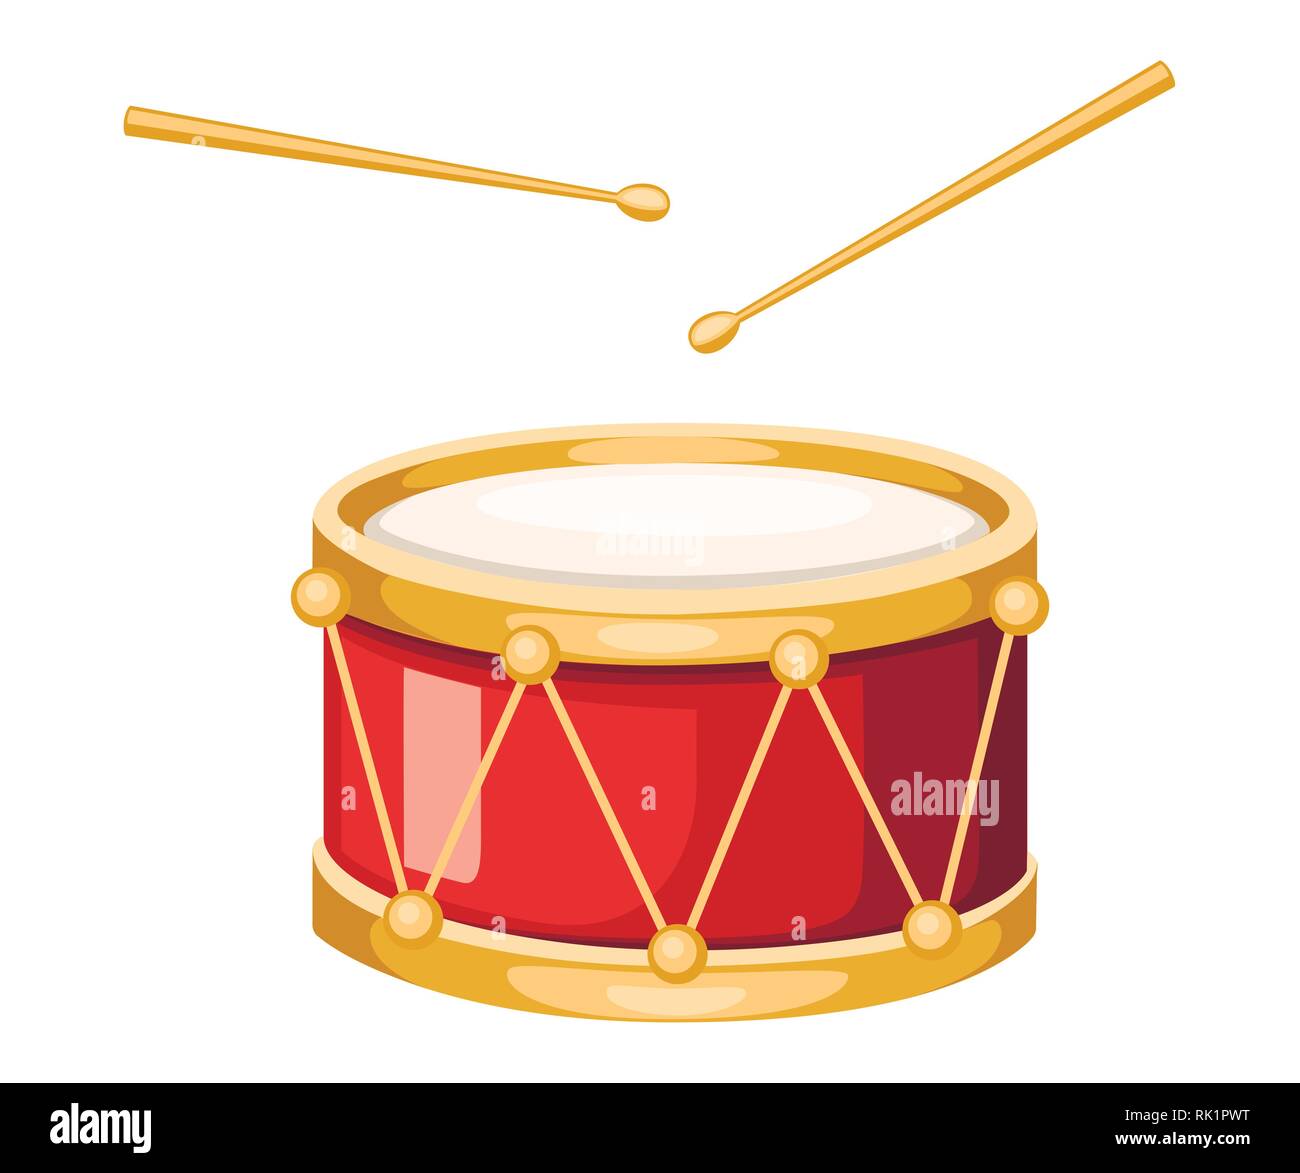 https://c8.alamy.com/comp/RK1PWT/red-drum-and-wooden-drum-sticks-musical-instrument-drum-machine-flat-vector-illustration-isolated-on-white-background-RK1PWT.jpg